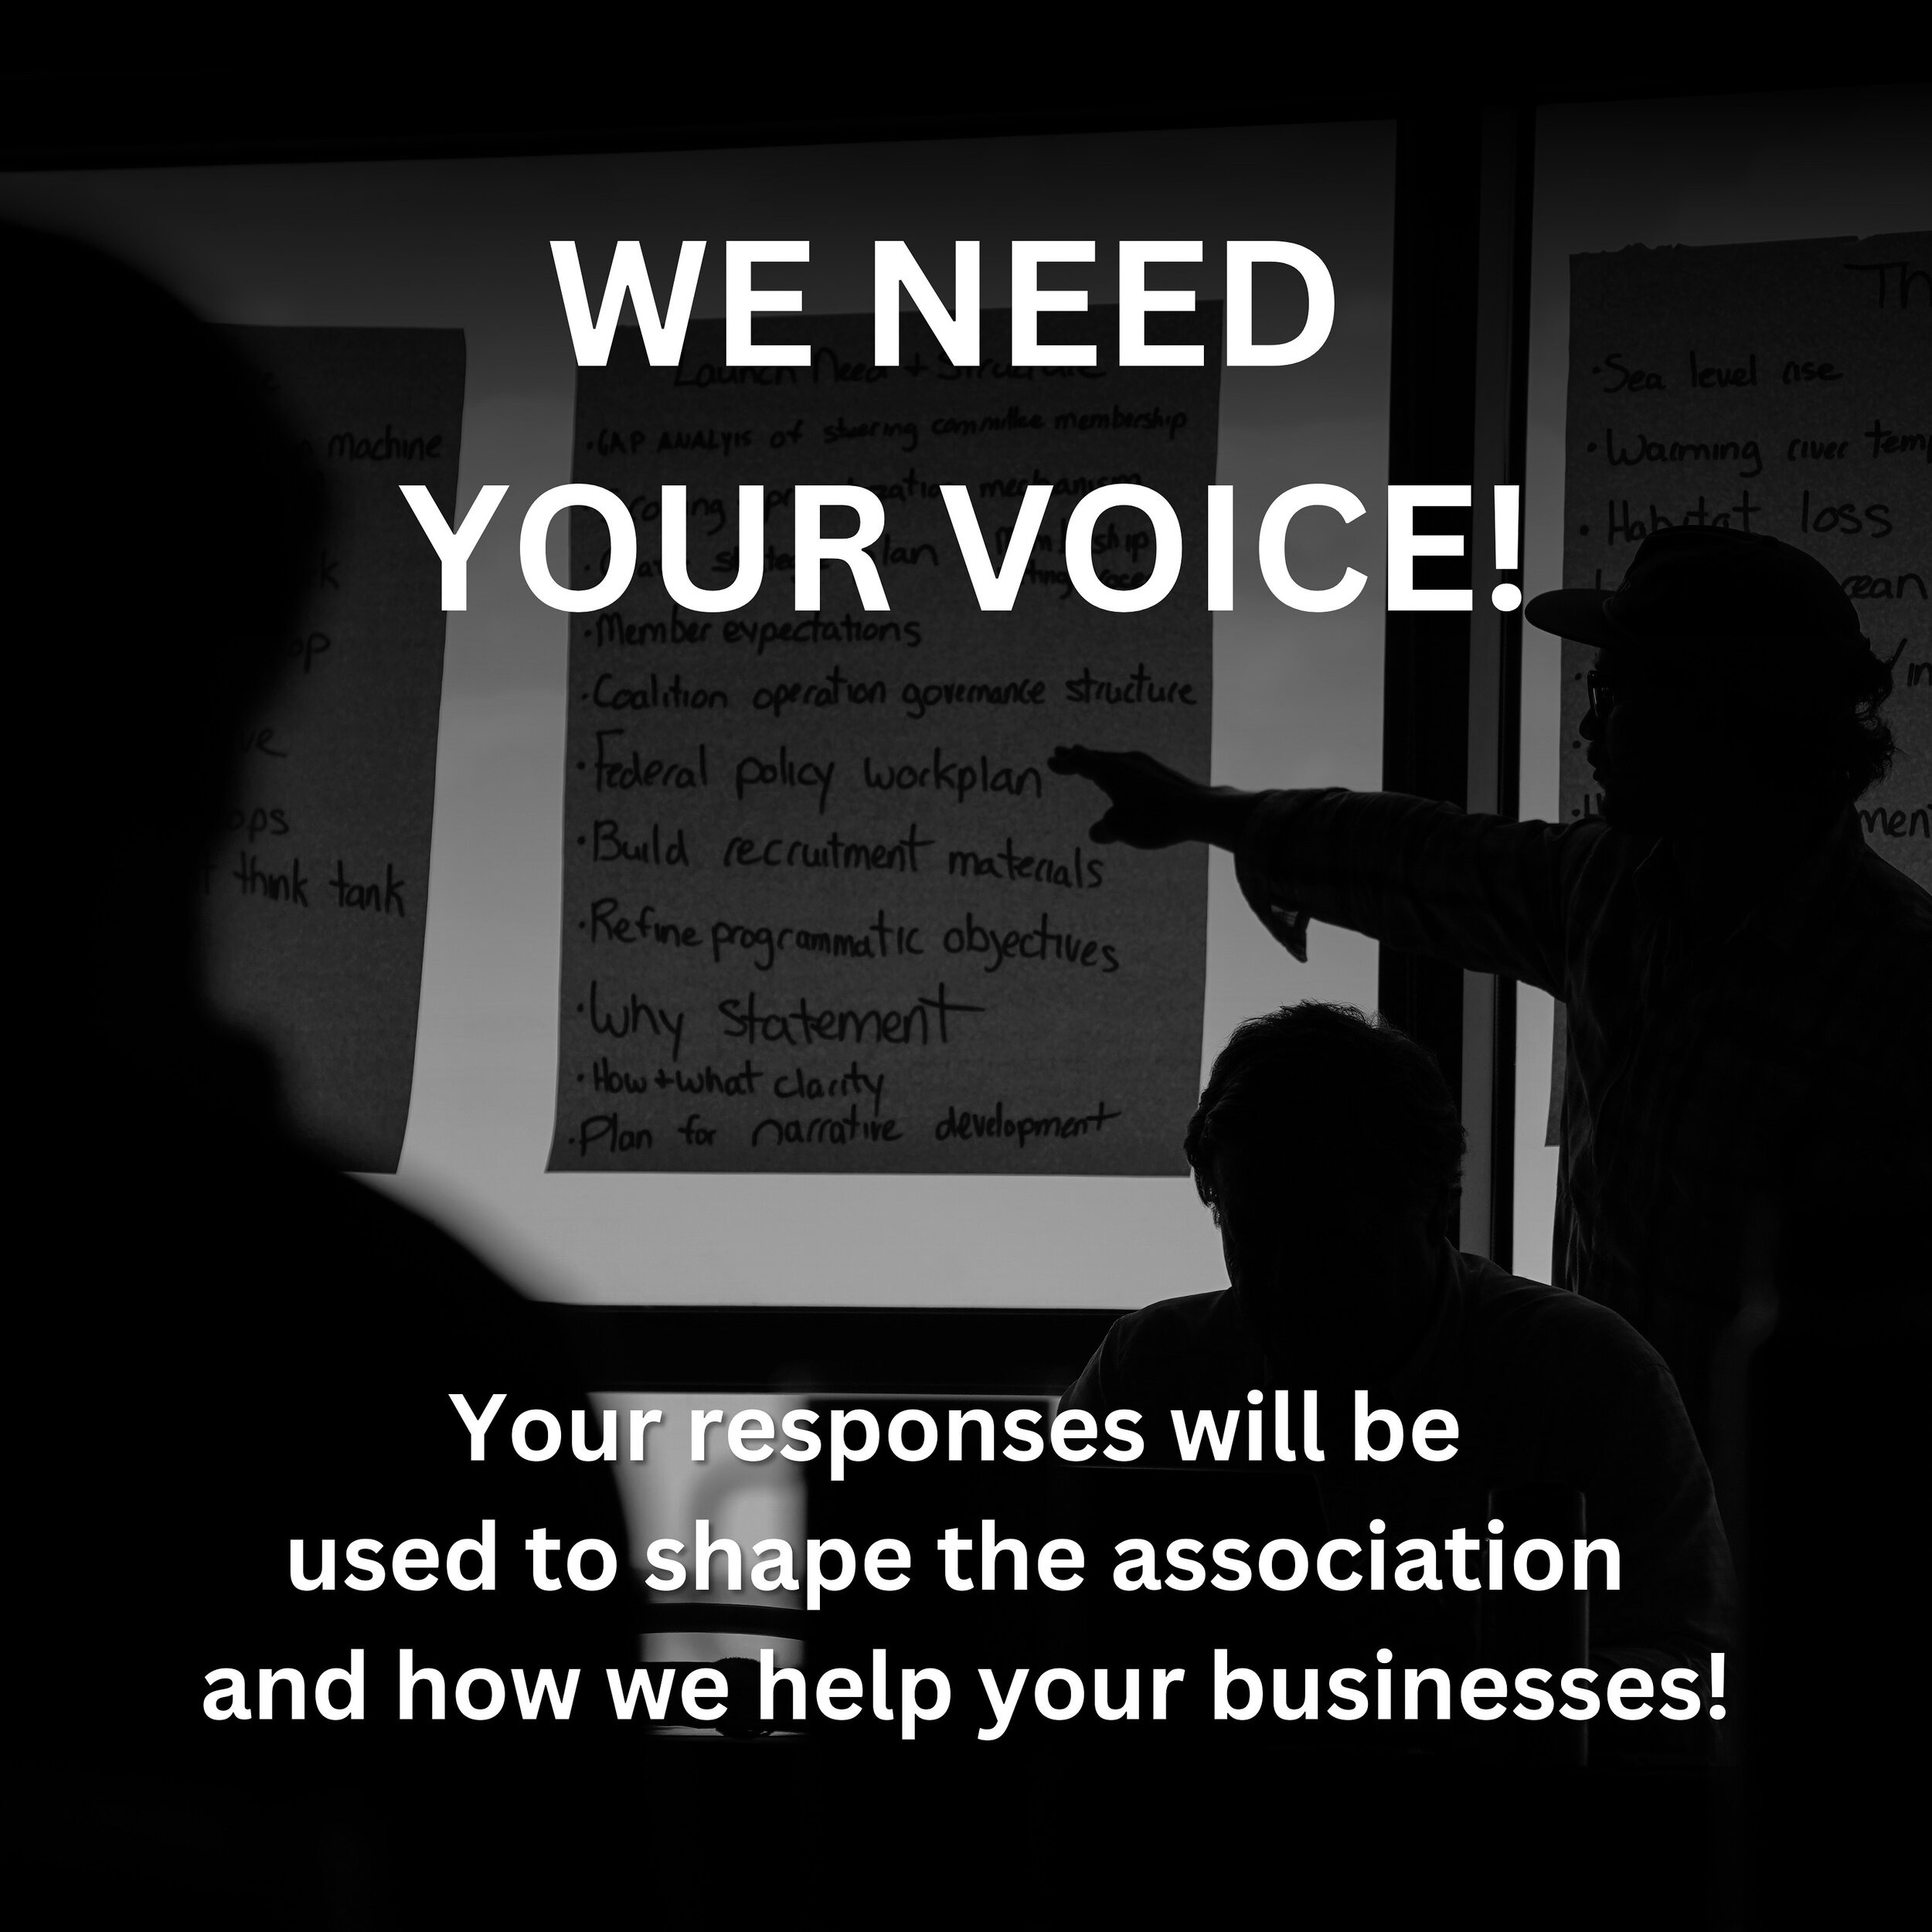 We need your voice by March 15th to help shape the association and how we help your businesses!  Link in bio for the survey.